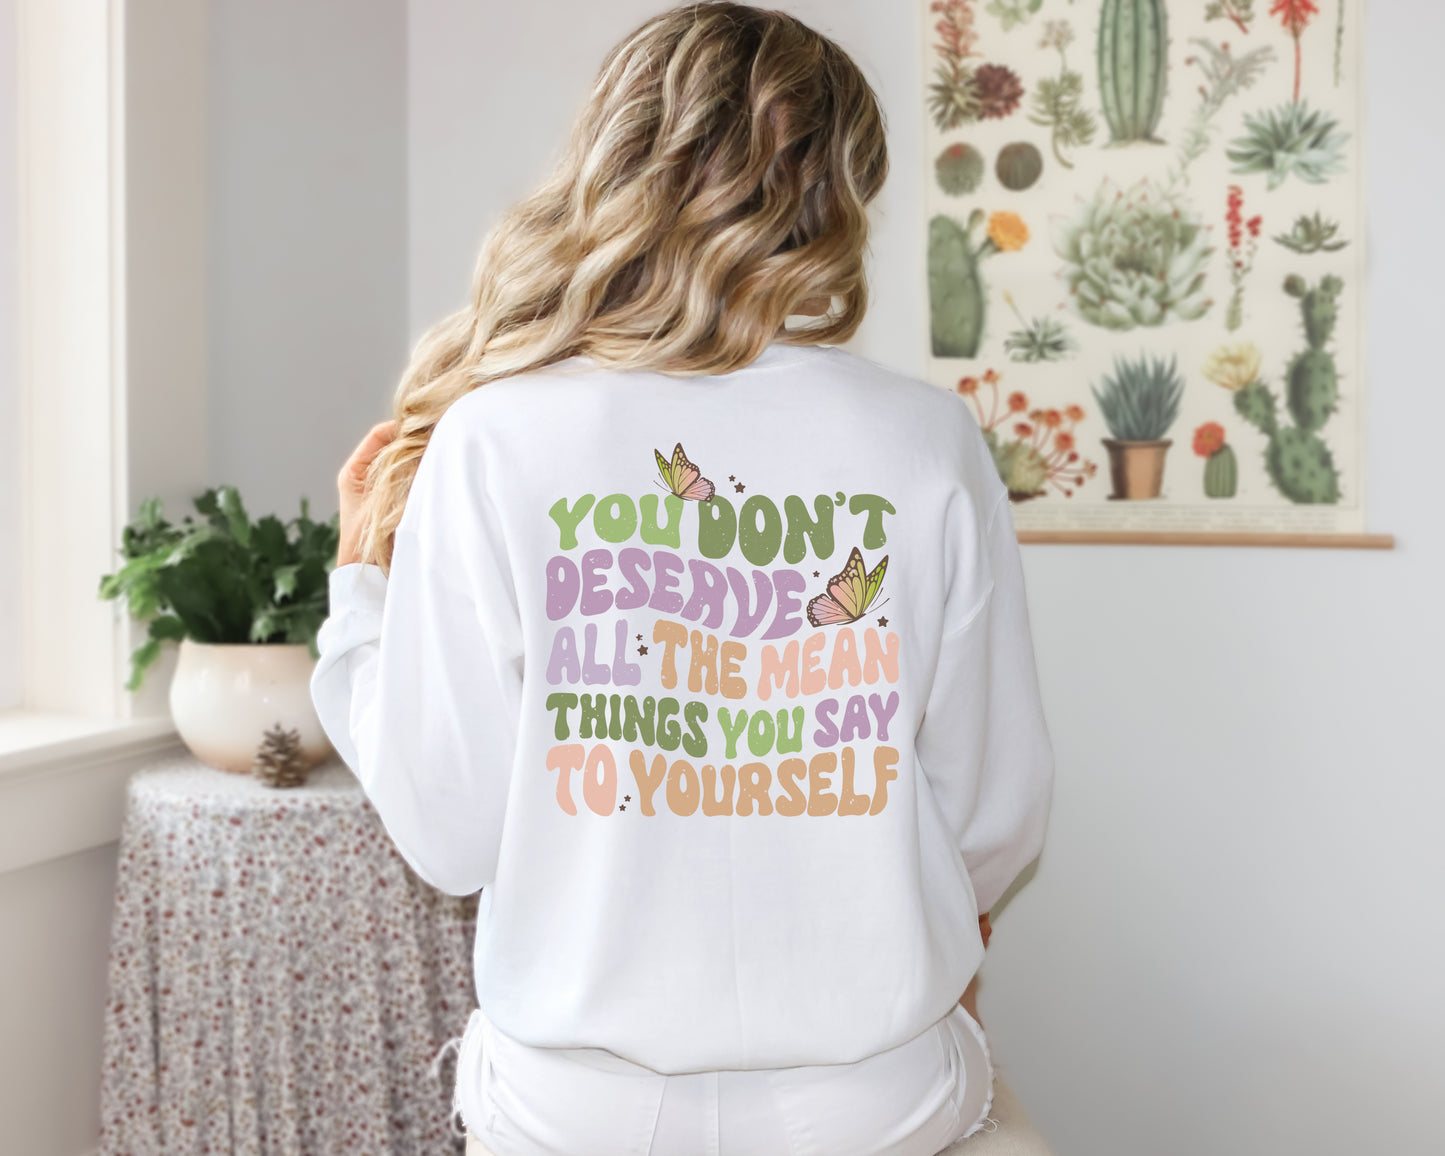 You Don't Deserve All The Mean Things You Say To Yourself Sweatshirt | Motivational Crewneck Sweatshirts